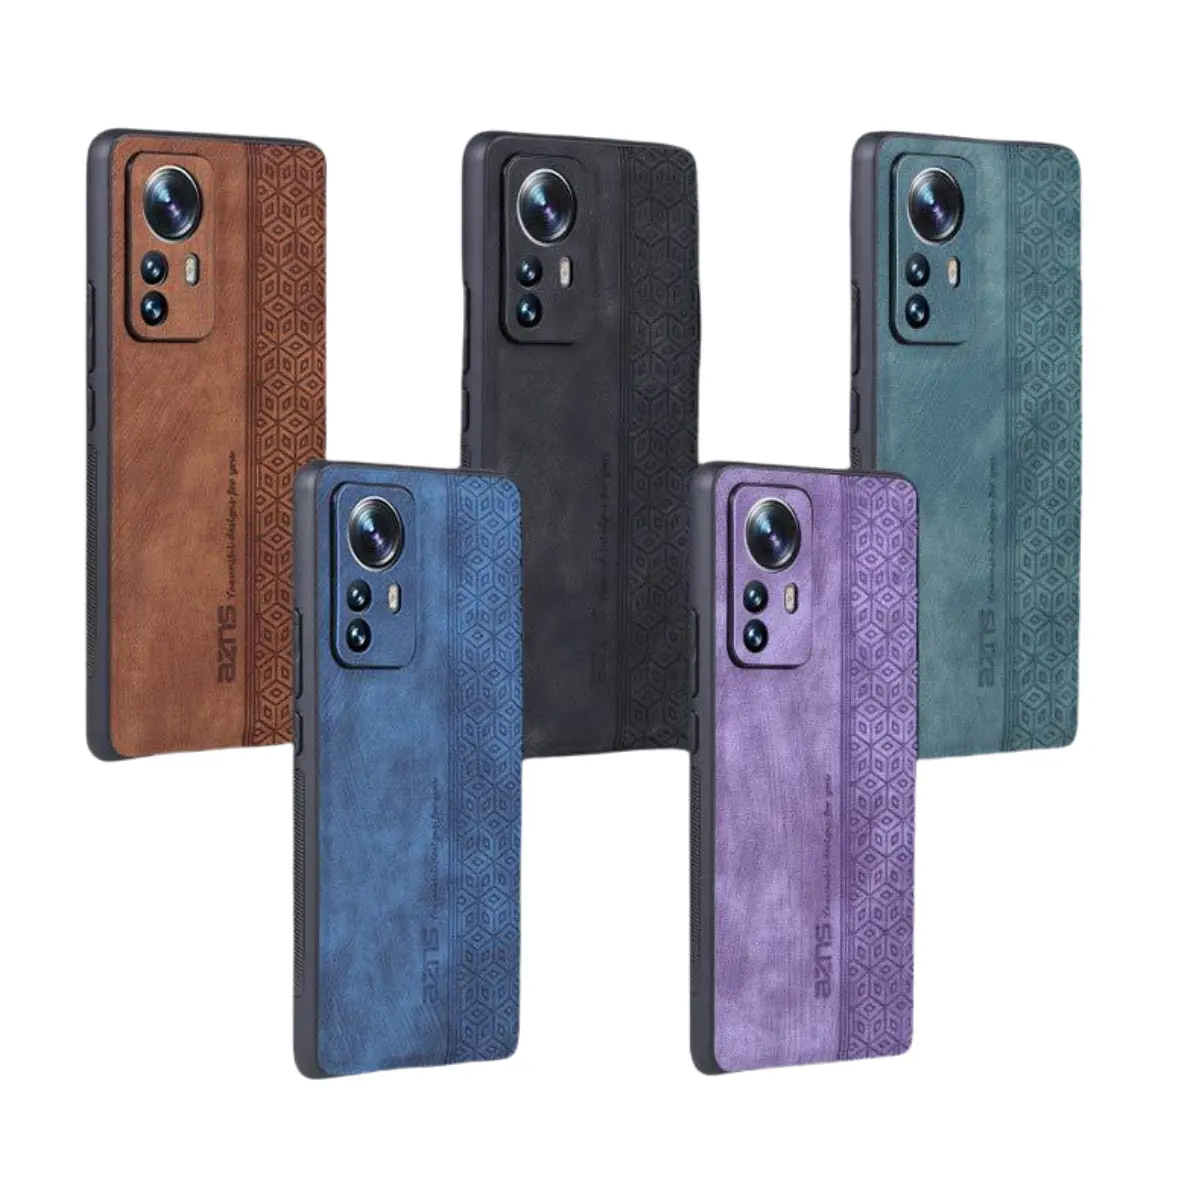 Suitable for Xiaomi 12 13T hot pressed skin feel leather case suitable for Redmi Note 12 13 Pro business case